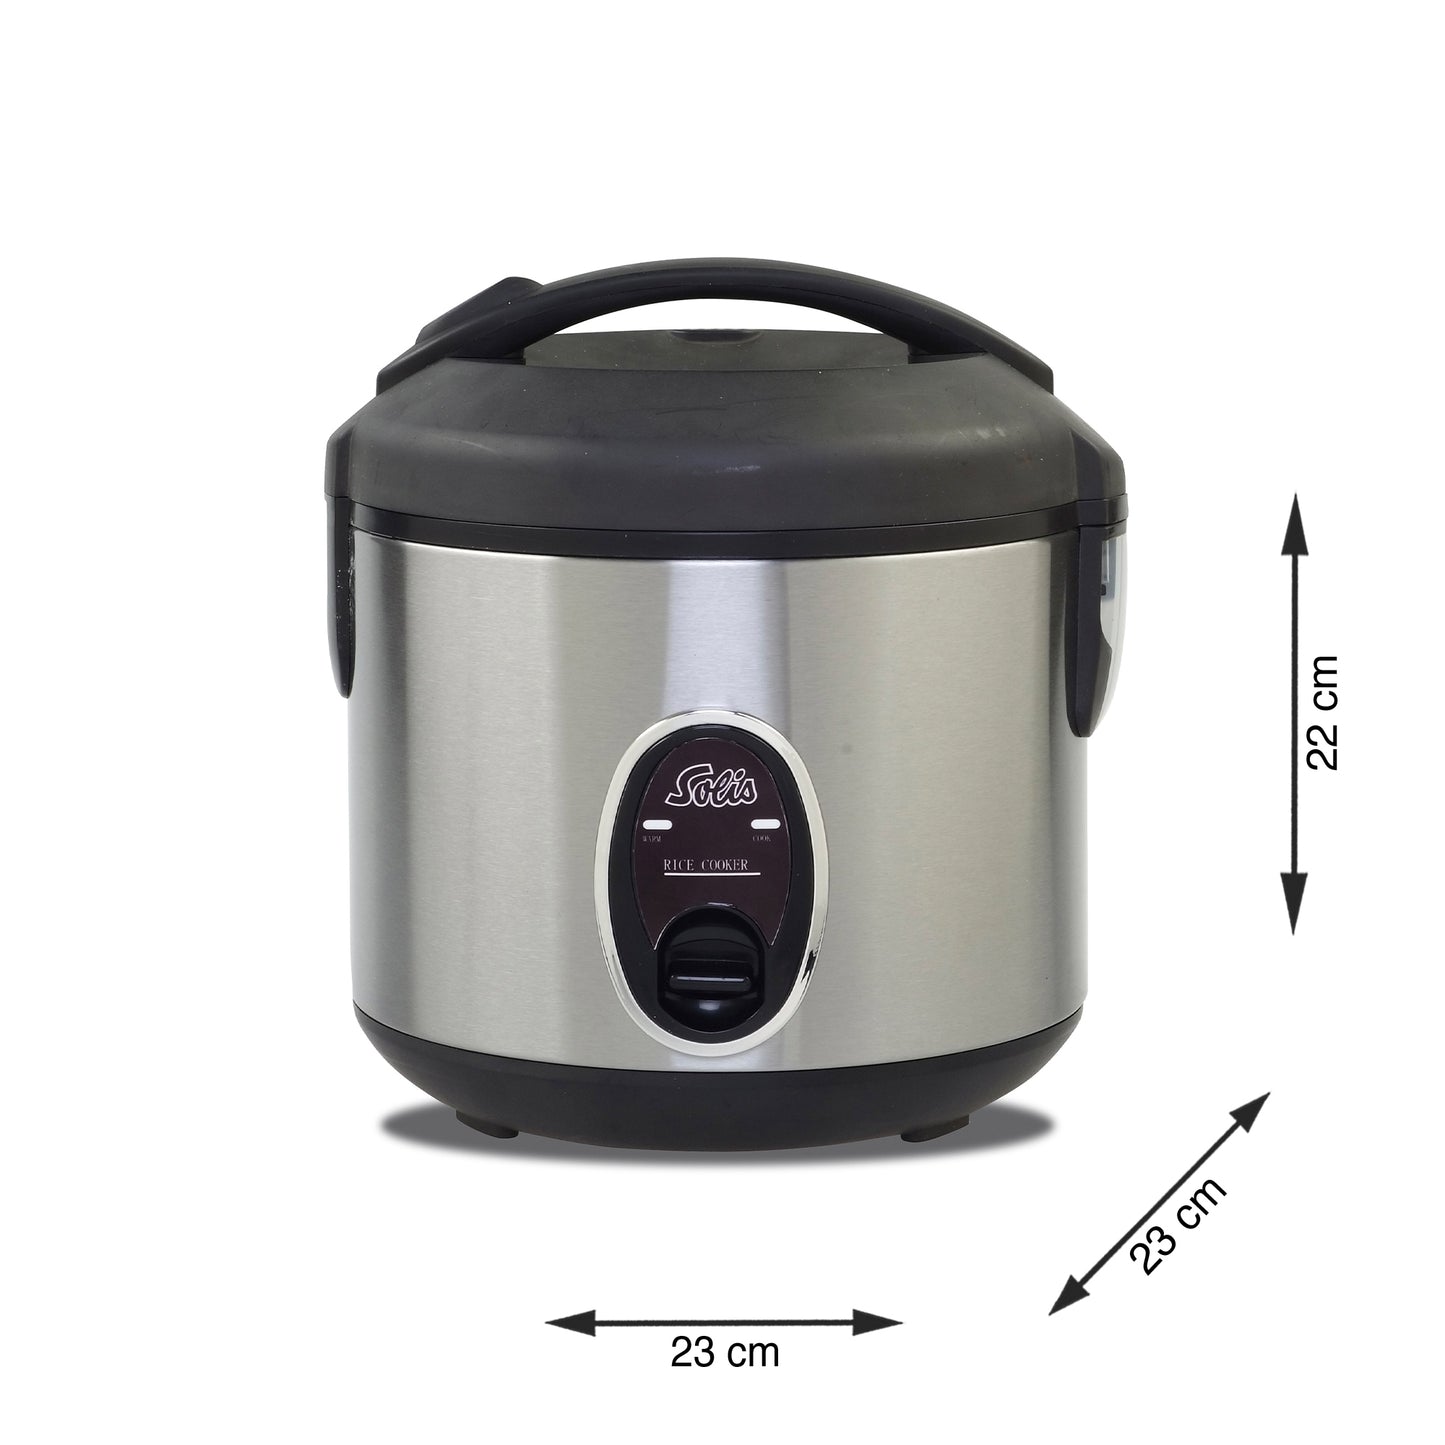 Rice Cooker Compact (Typ 821)